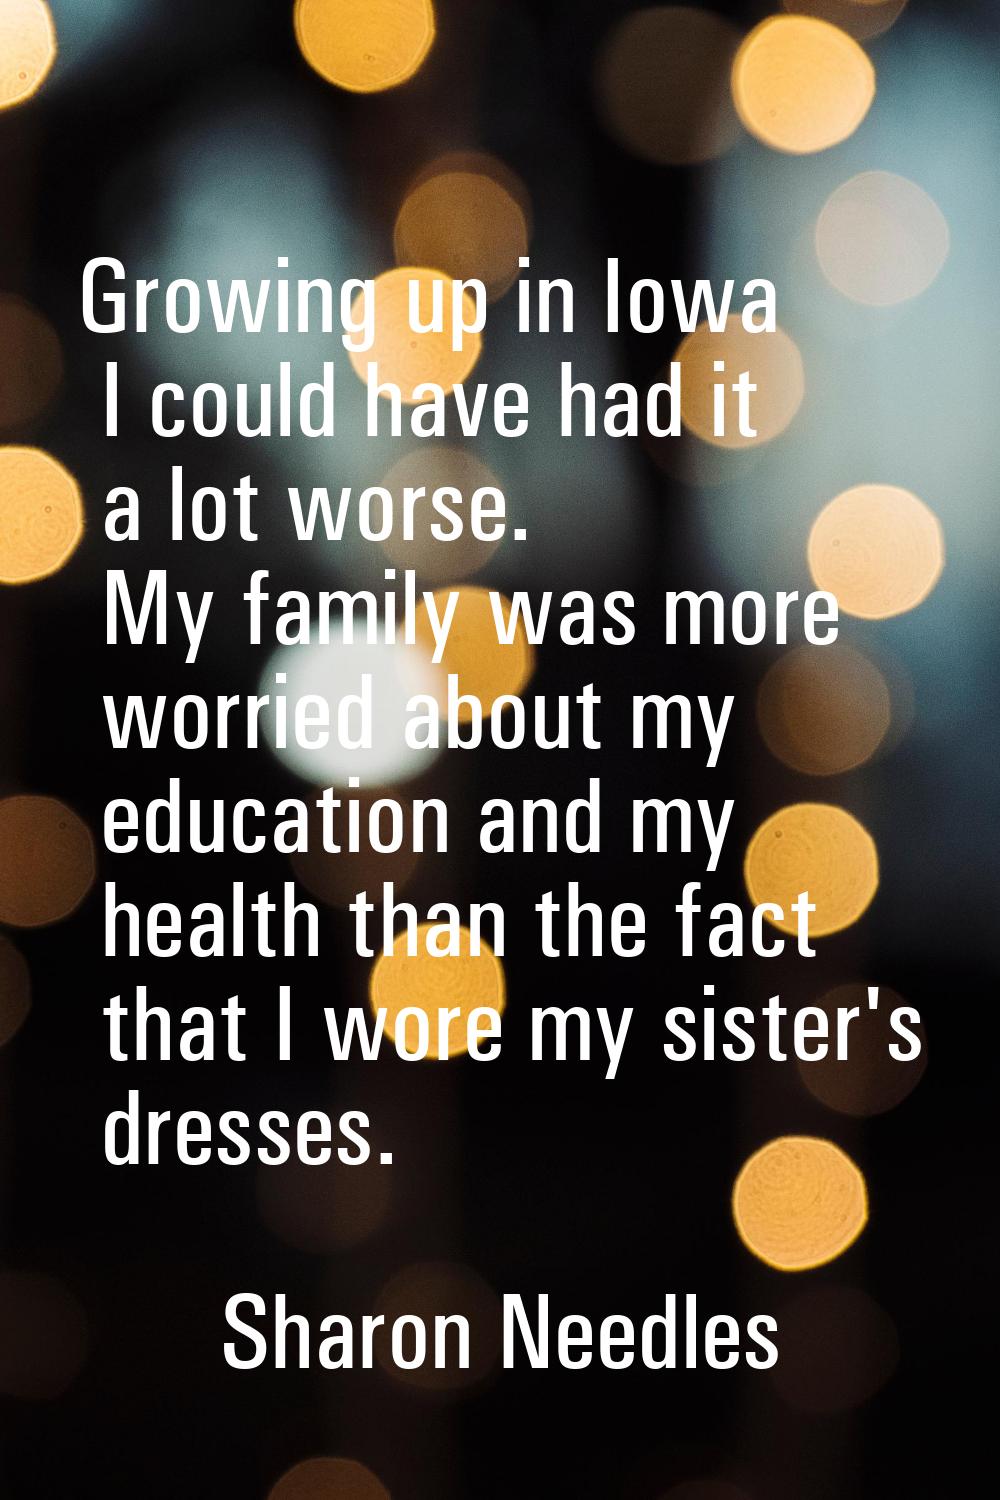 Growing up in Iowa I could have had it a lot worse. My family was more worried about my education a